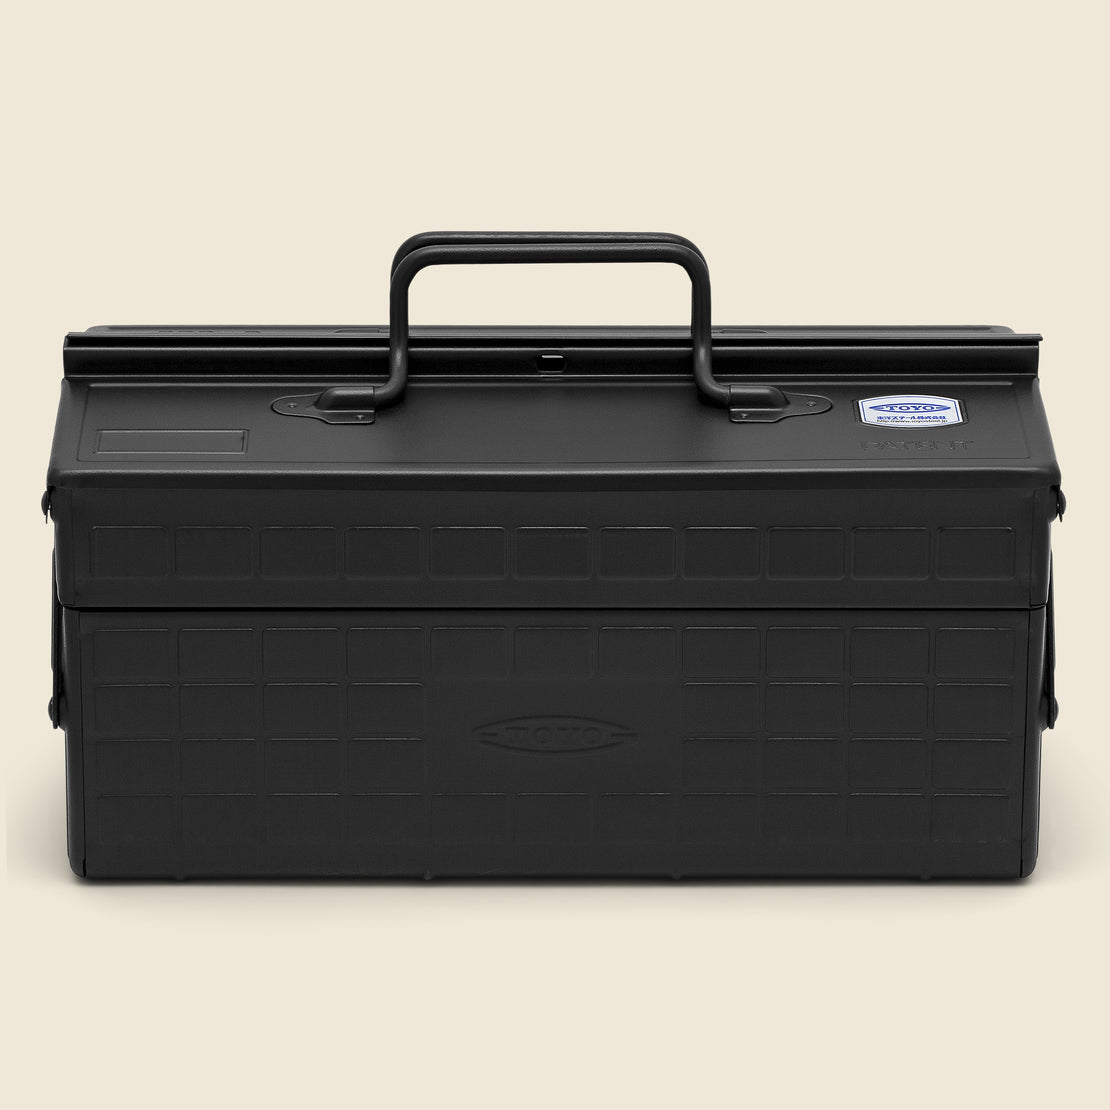 Home Cantilever Toolbox - Black